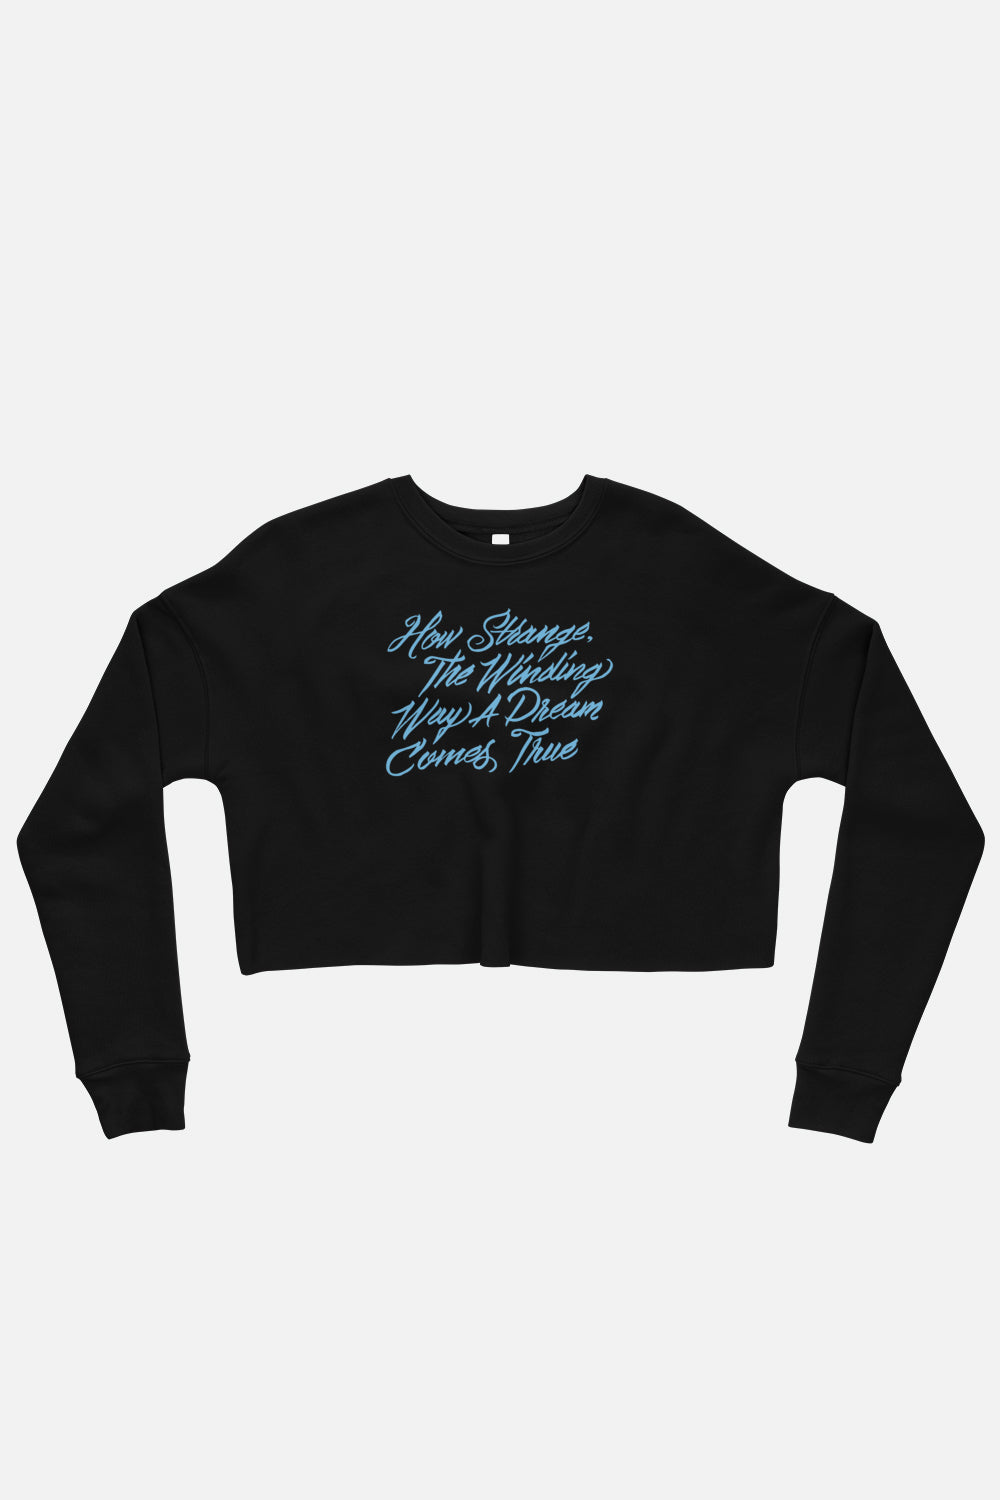 The Winding Way Fitted Crop Sweatshirt | The Invisible Life of Addie LaRue